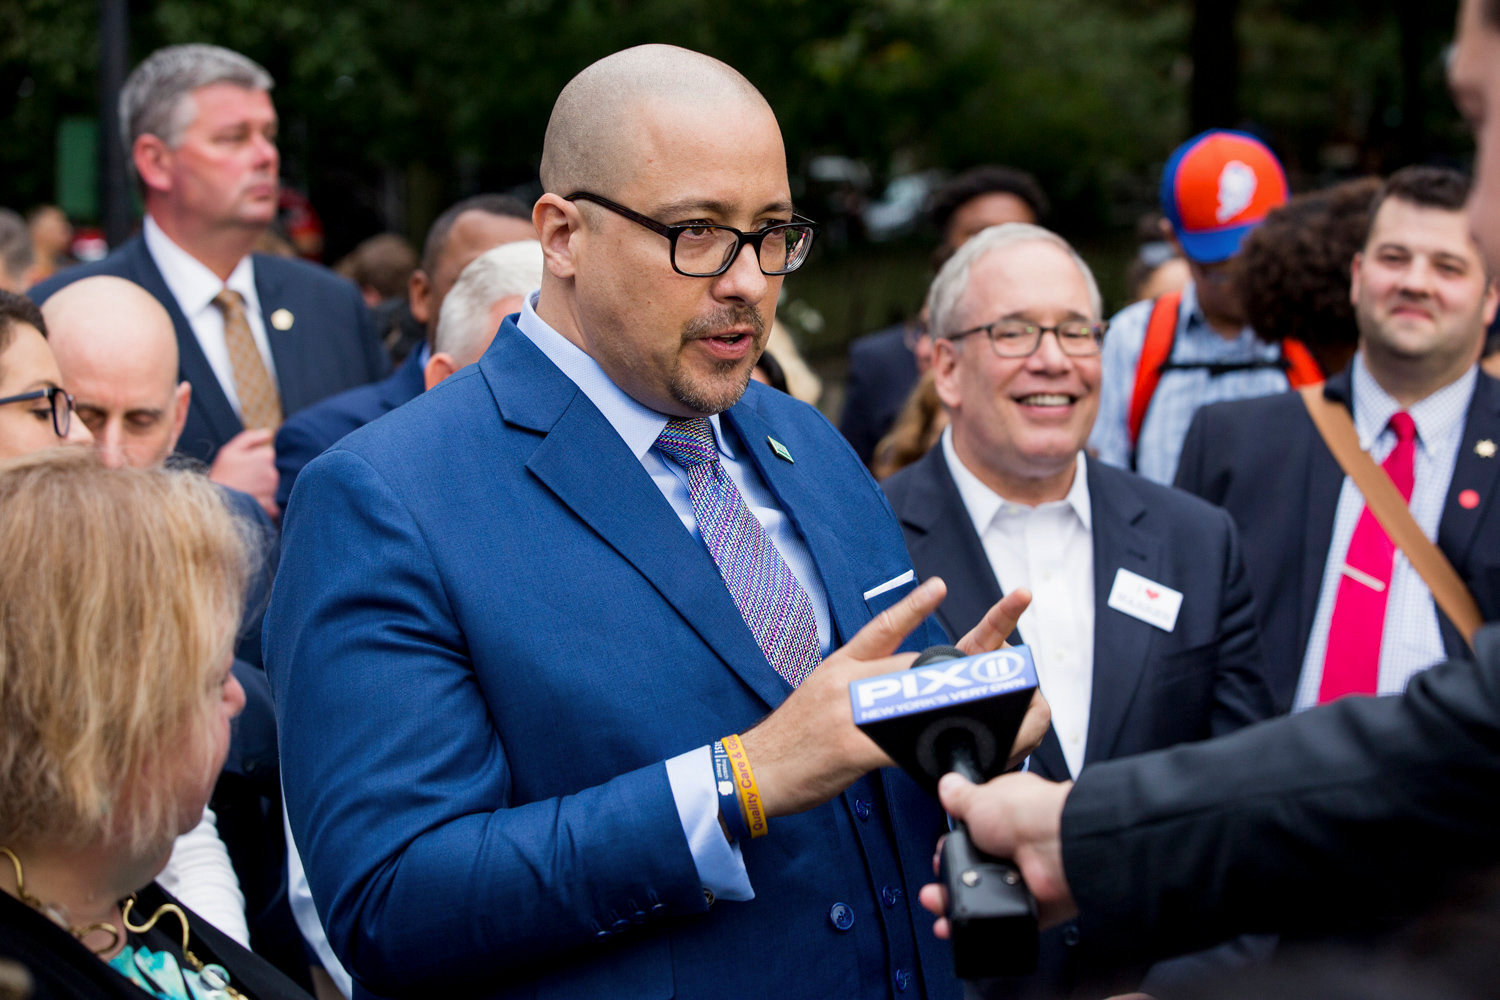 State Sen. Gustavo Rivera says he does not support BDS, despite what Assemblyman Jeffrey Dinowitz has claimed.